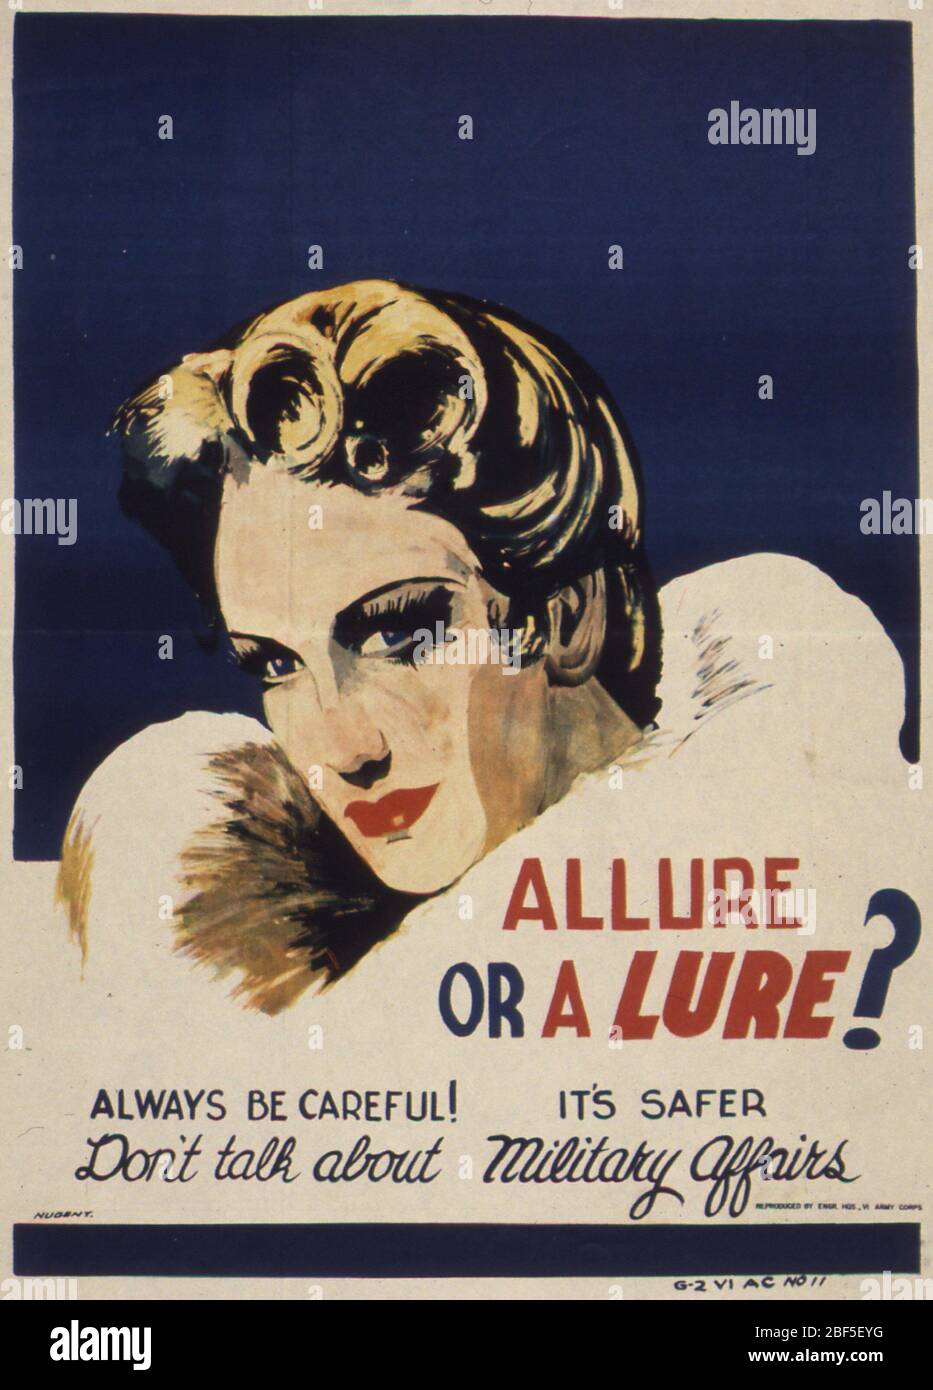 ALLURE OR A LURE ? American WW2 poster warning against accidentally giving information to the enemy Stock Photo